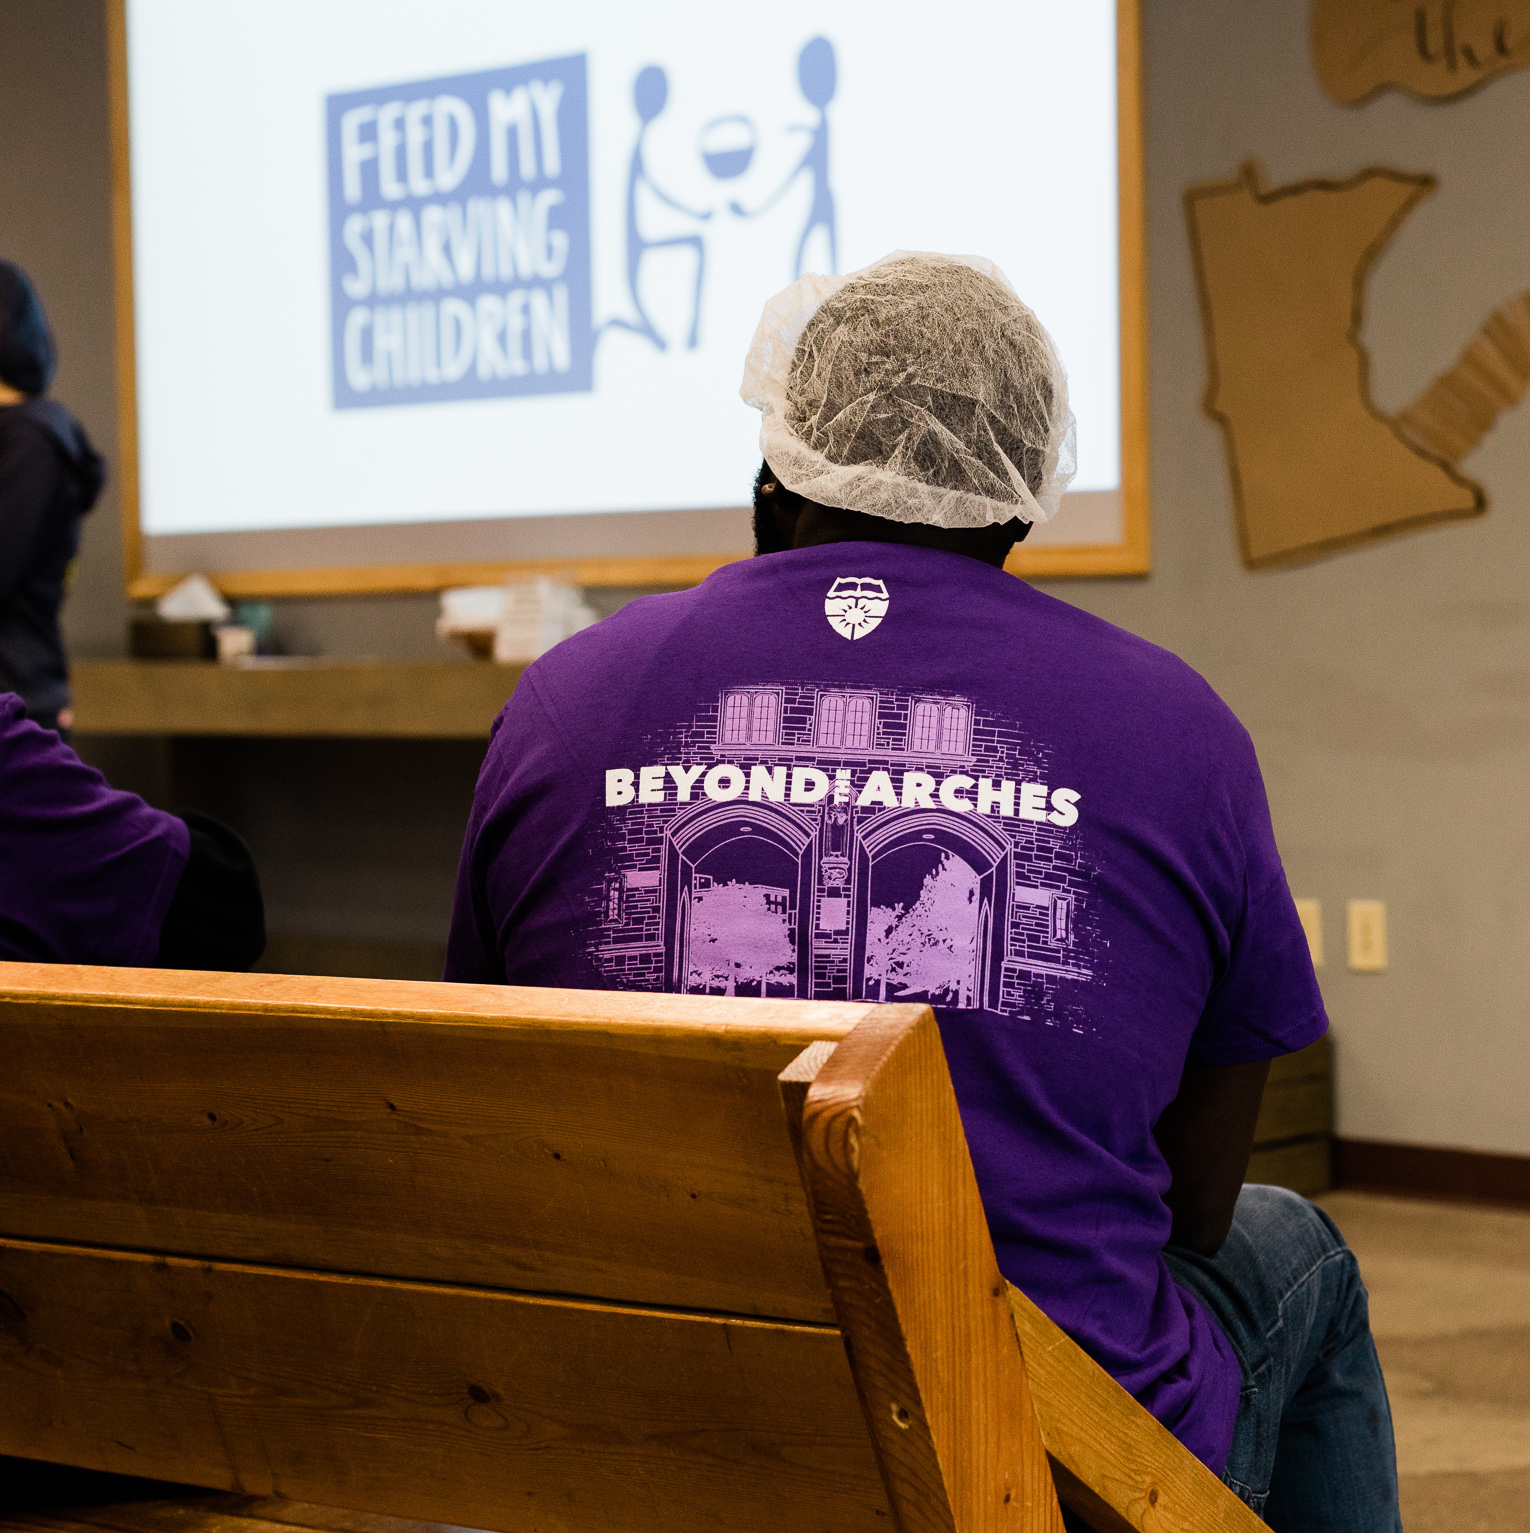 a 3M employee watches a demonstration at a Feed My Starving Children event